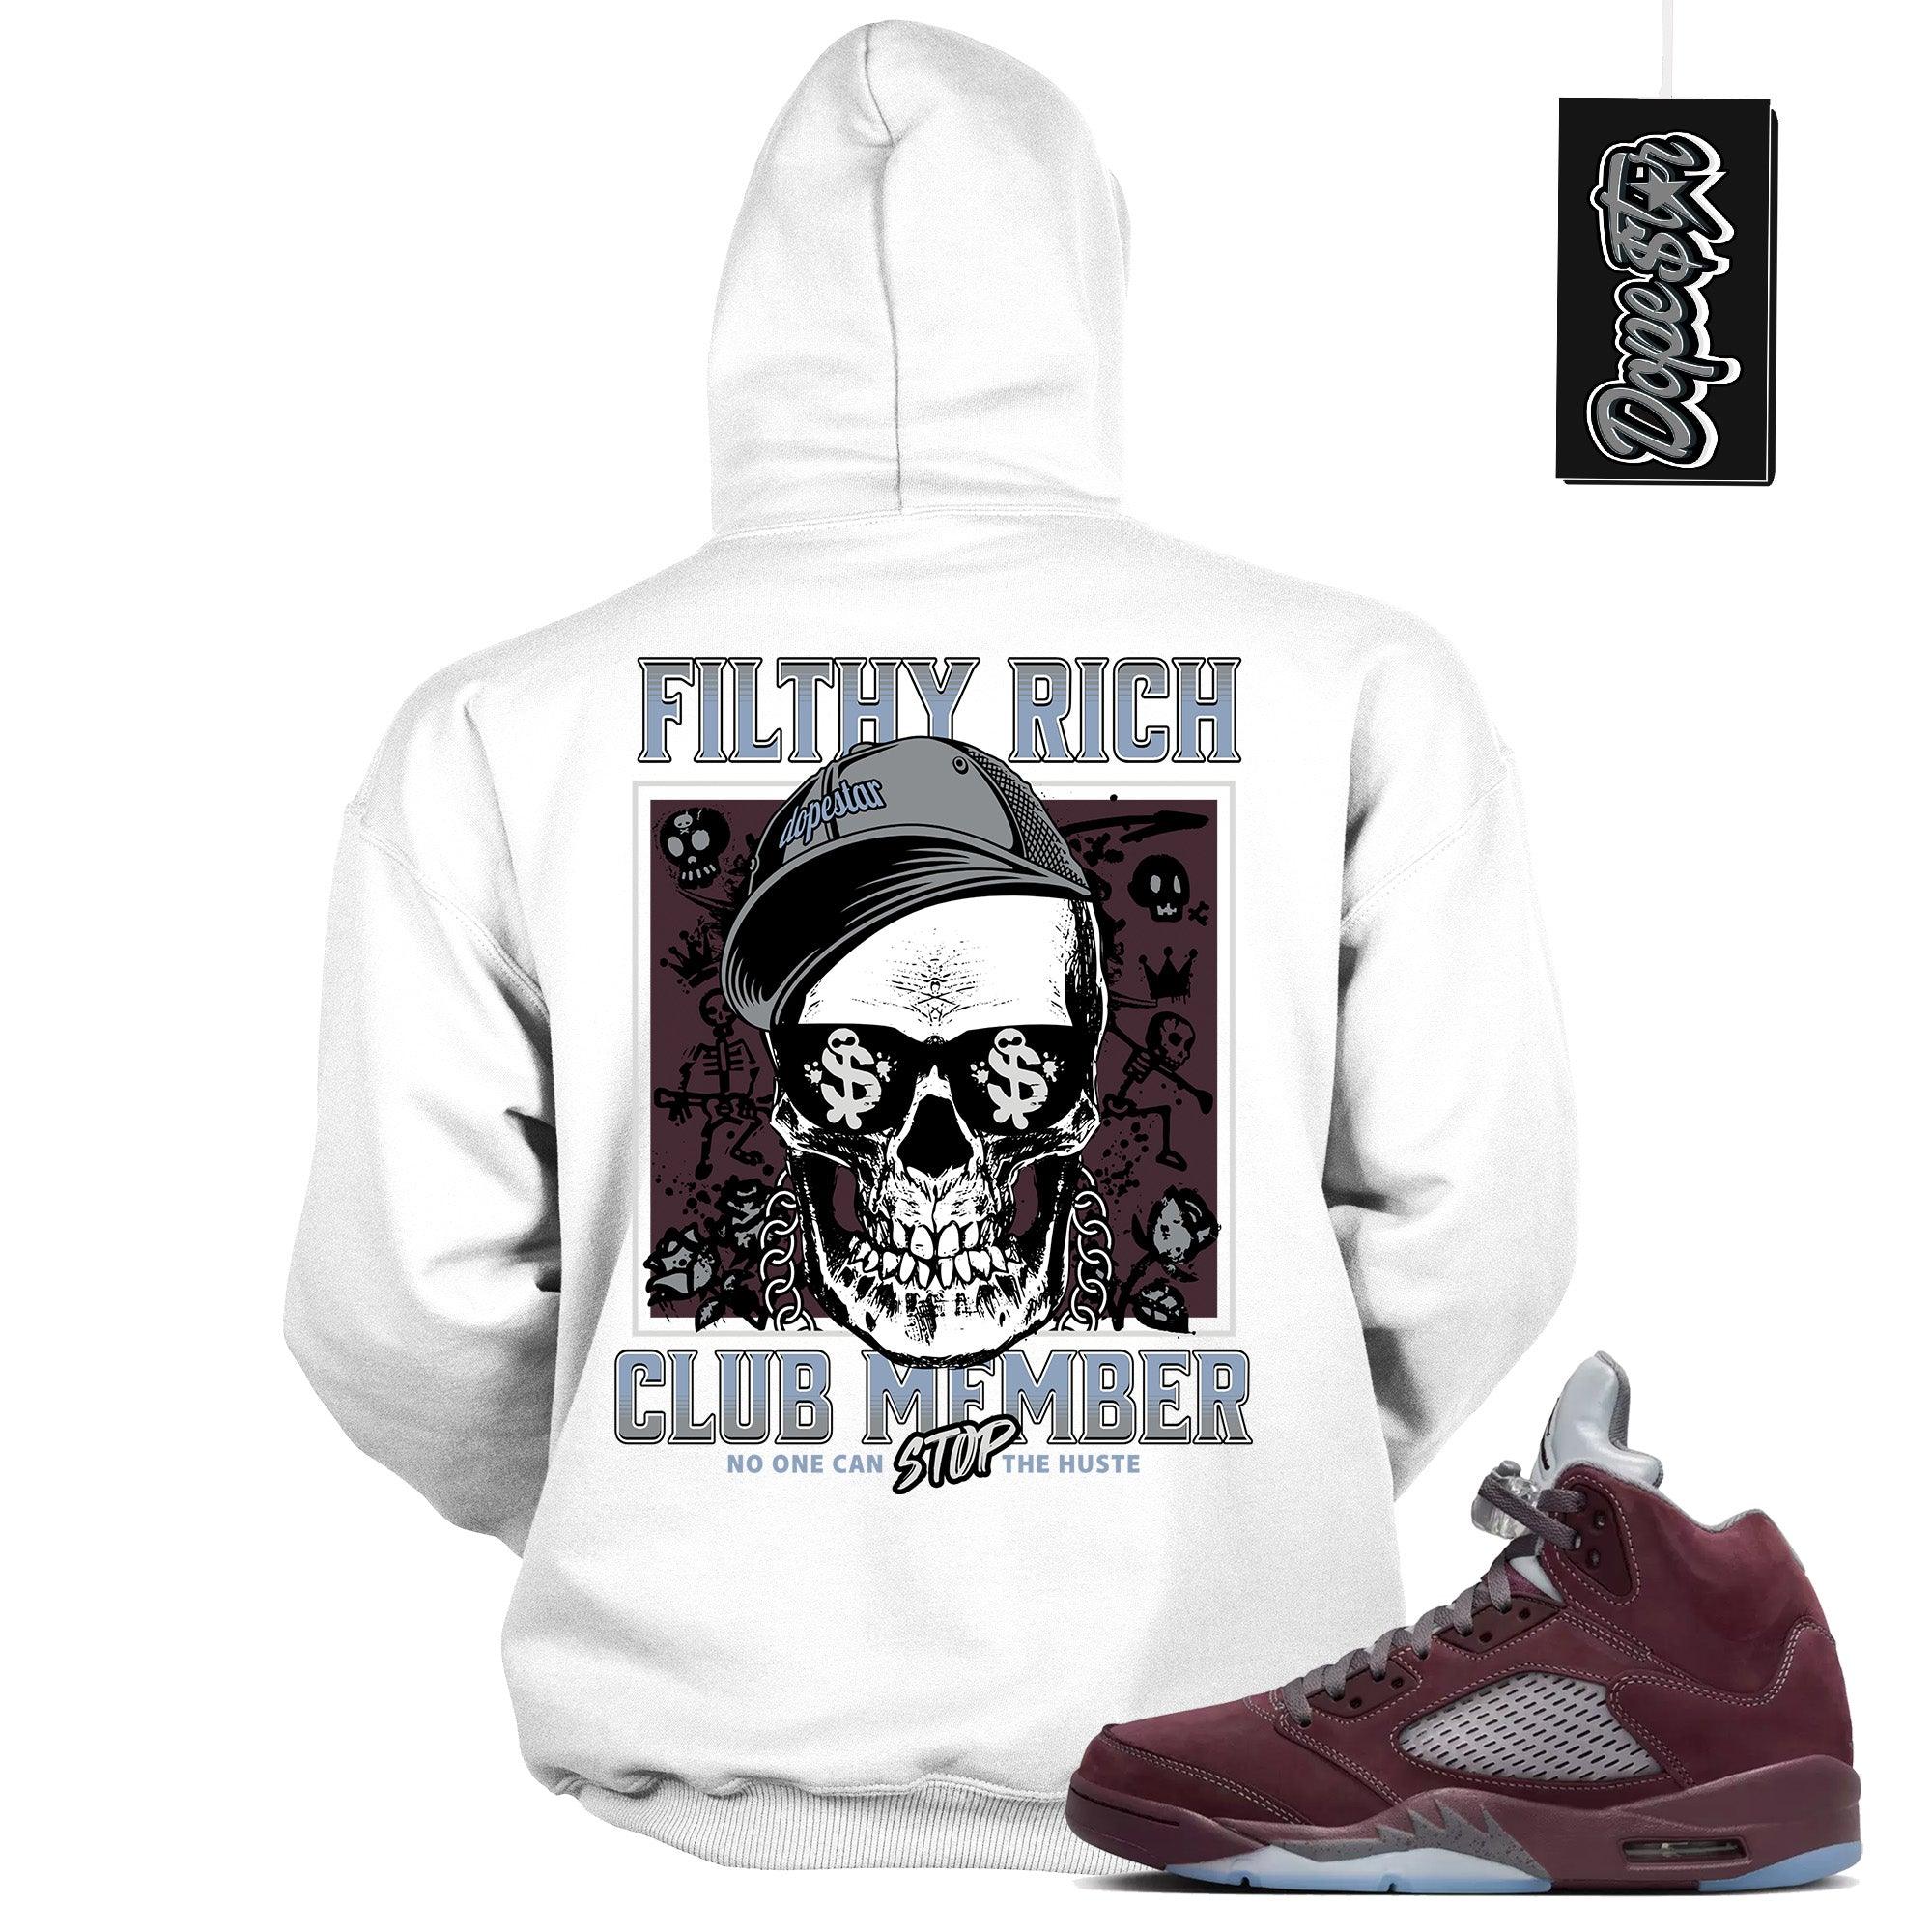 Cool White Graphic Hoodie with “ FILTHY RICH “ print, that perfectly matches Air Jordan 5 Burgundy 2023 sneakers